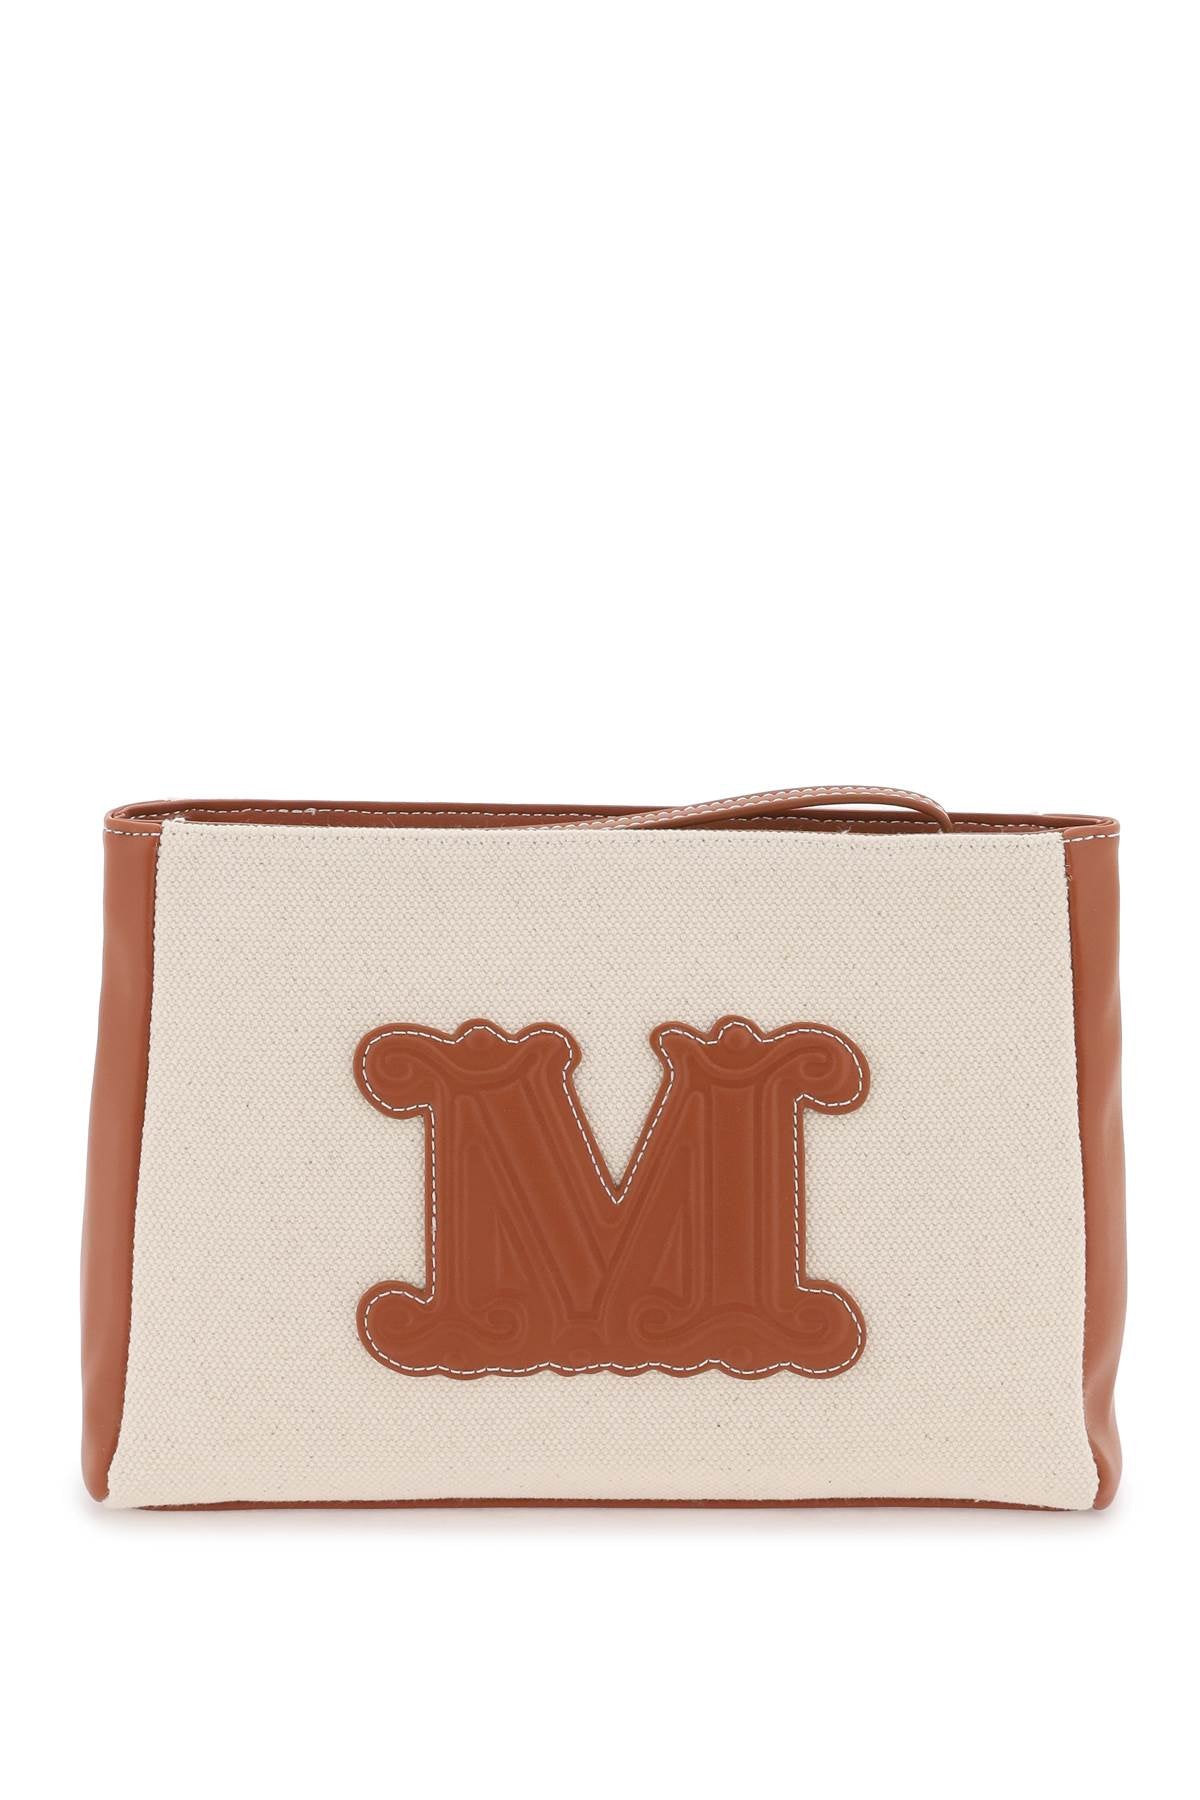 Max Mara Beachwear Replace With Double Quotecascia Pouch With Mon   Beige